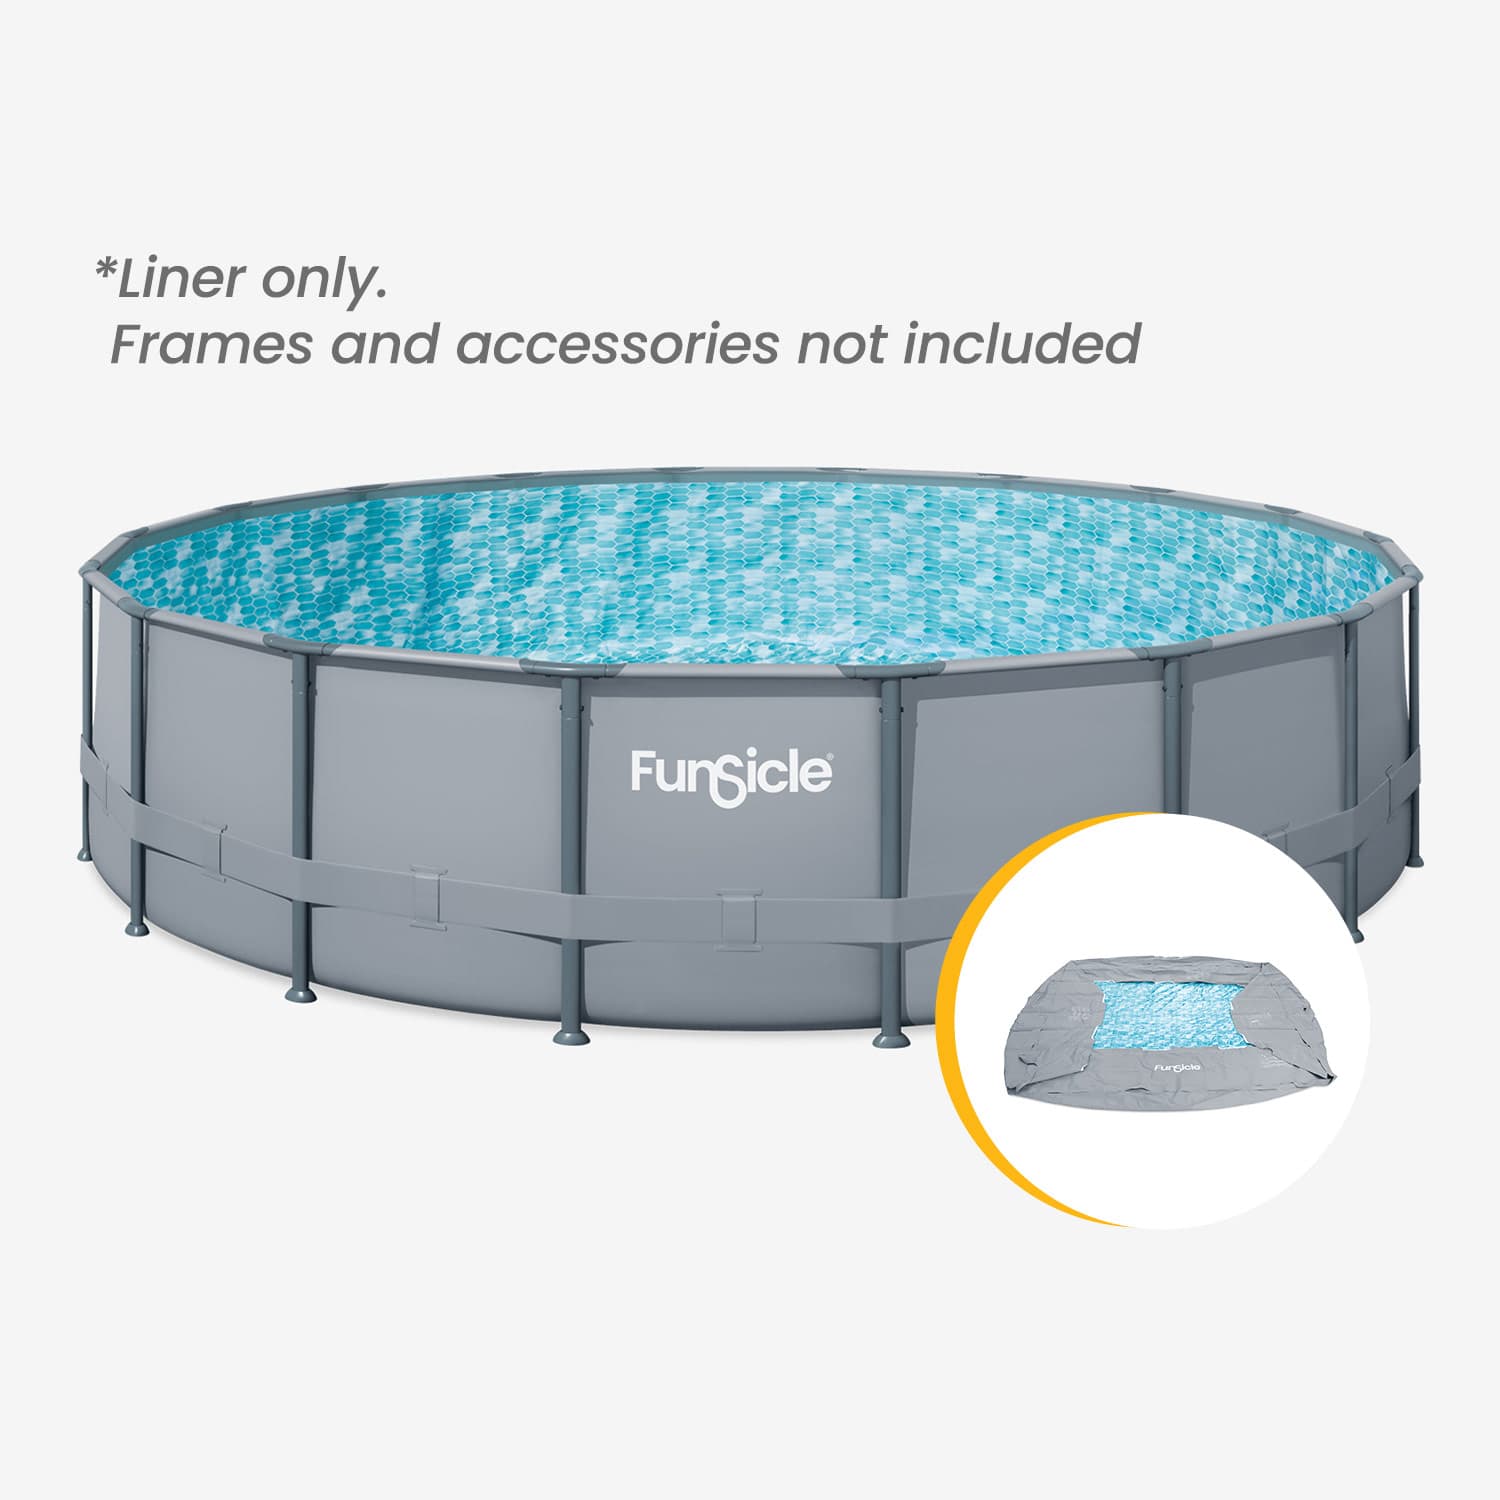 Funsicle 22 ft Oasis Pool Liner